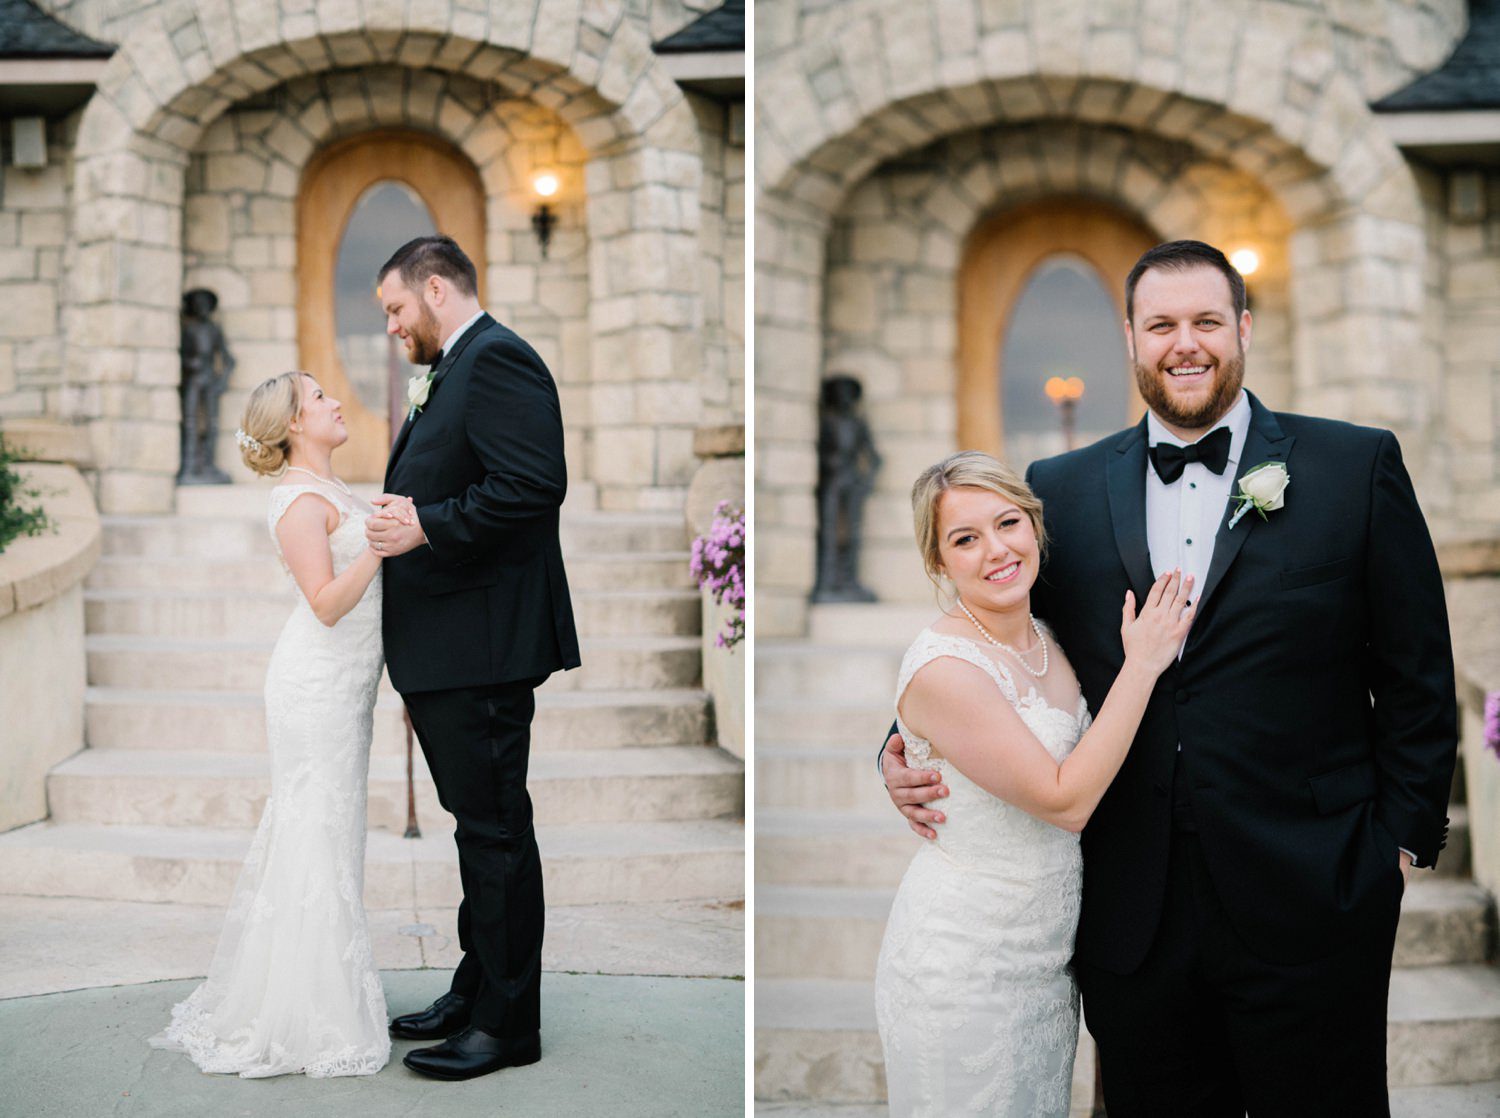 Bride and groom in front of Bride and groom during reception at Noland Castle Wedding by San Luis Obispo Wedding Photographer Austyn Elizabeth Photography.